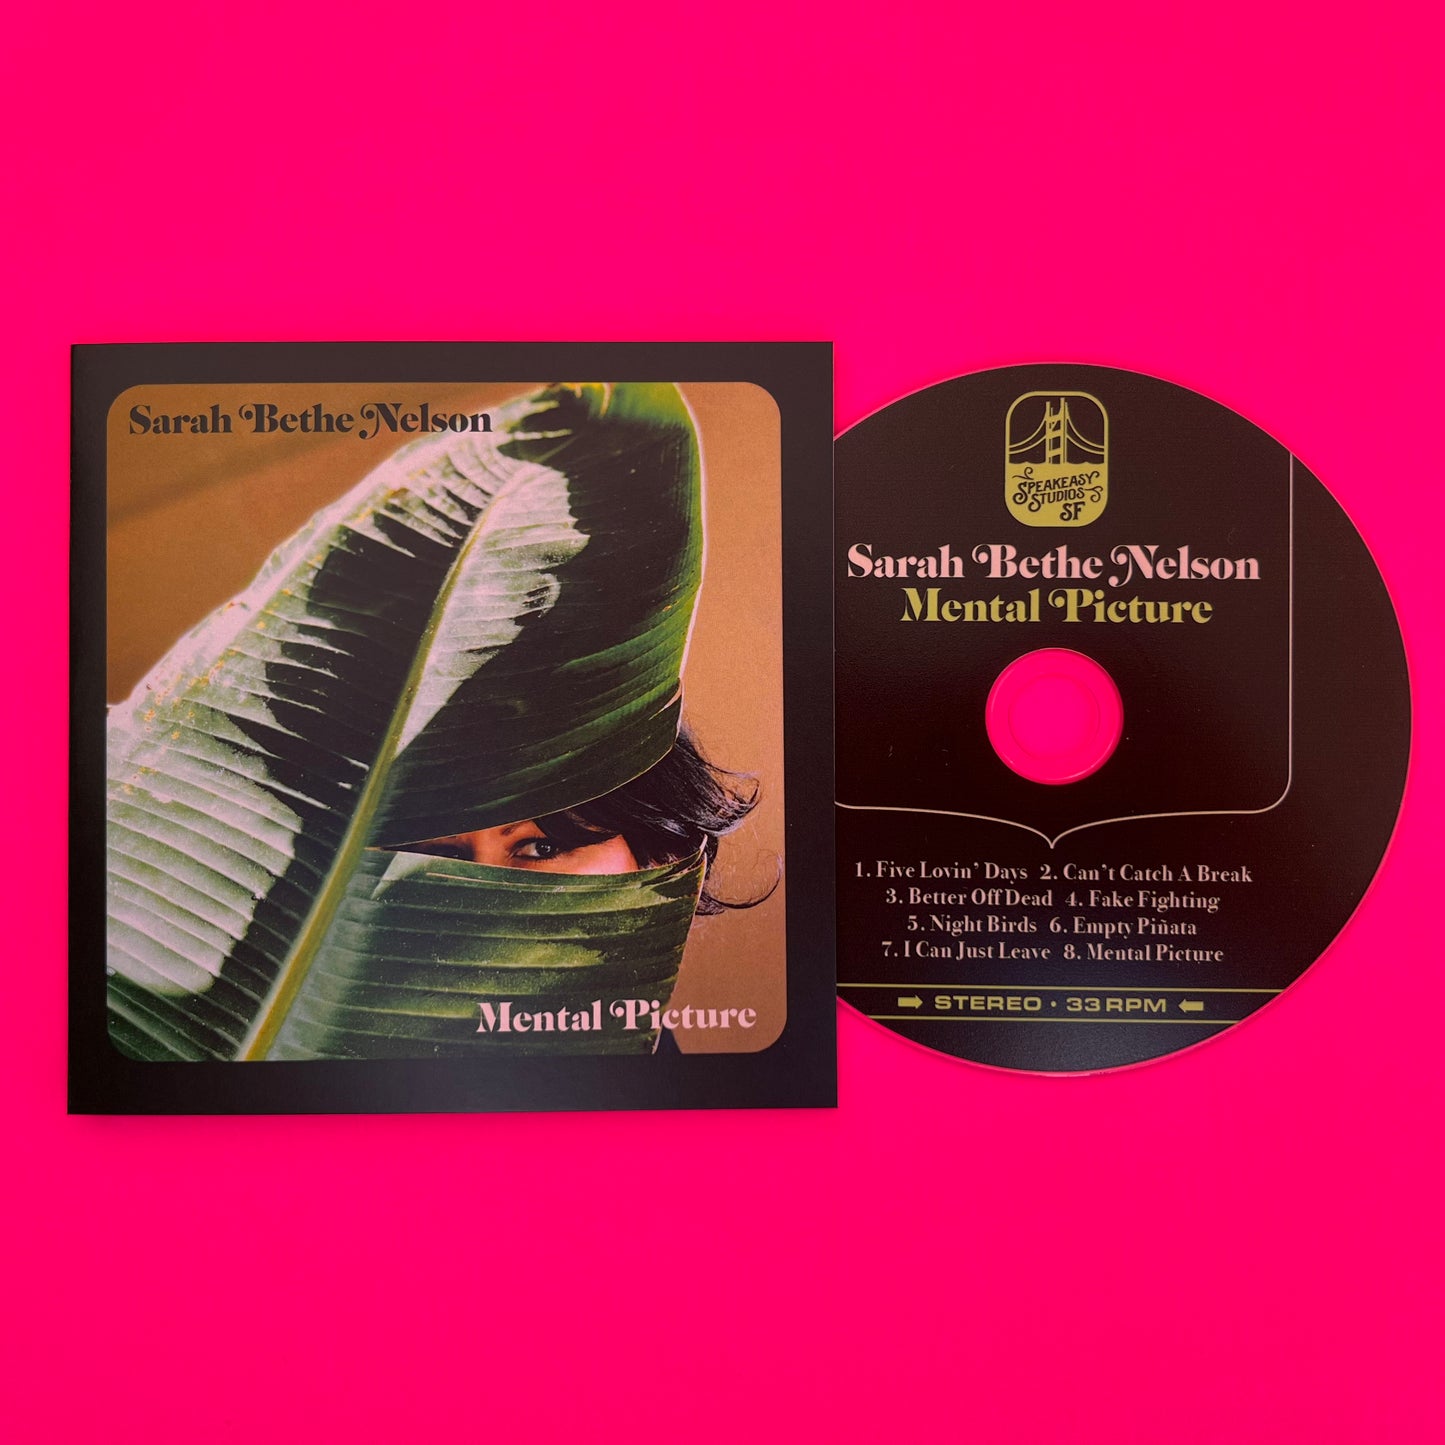 ‘Mental Picture’ CD by Sarah Bethe Nelson